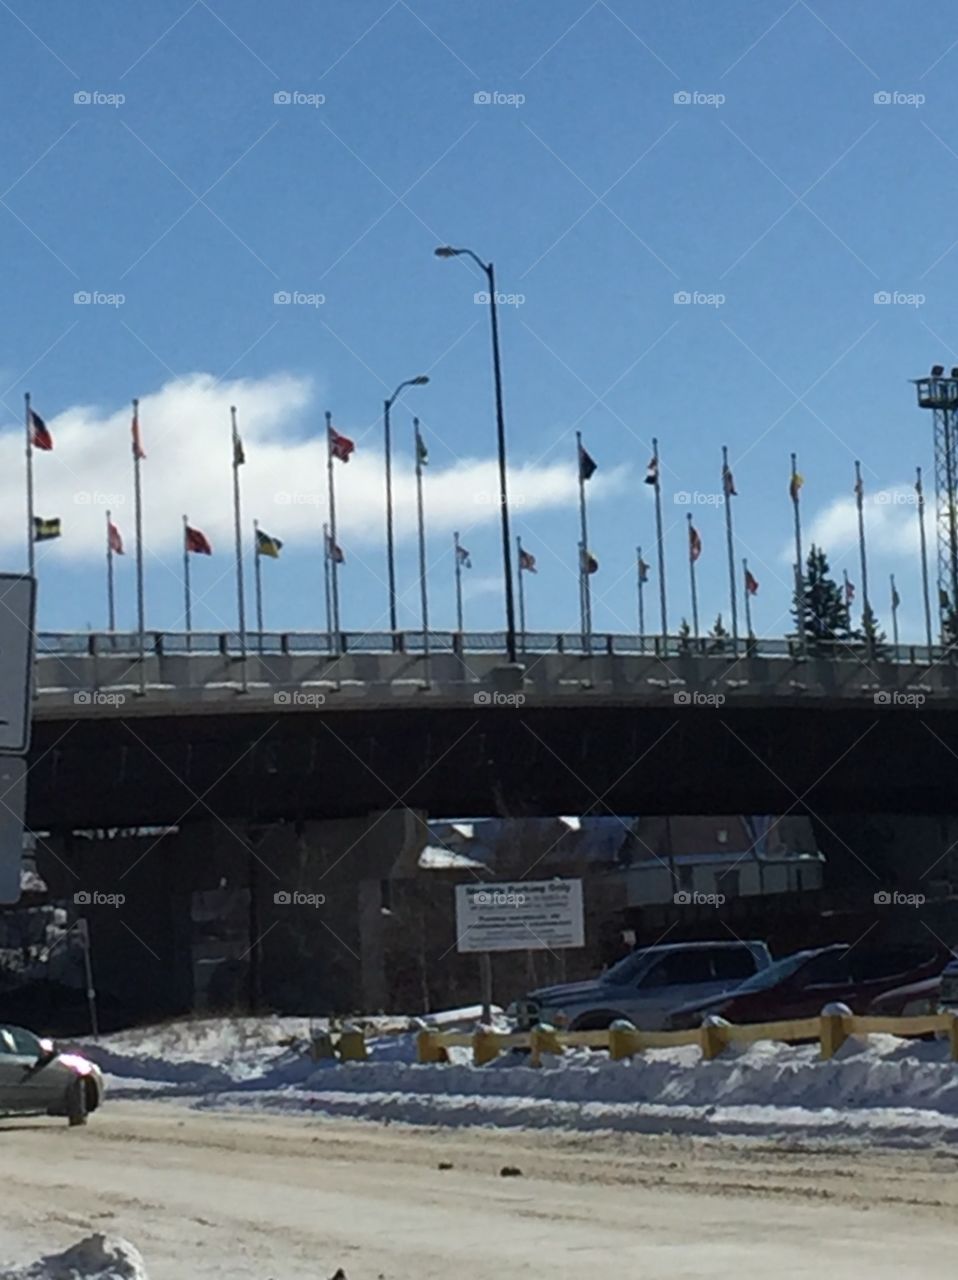 Sudbury Ontario One of the prettiest bridges in the world bridge of nations all the flags for all the countries five proudly